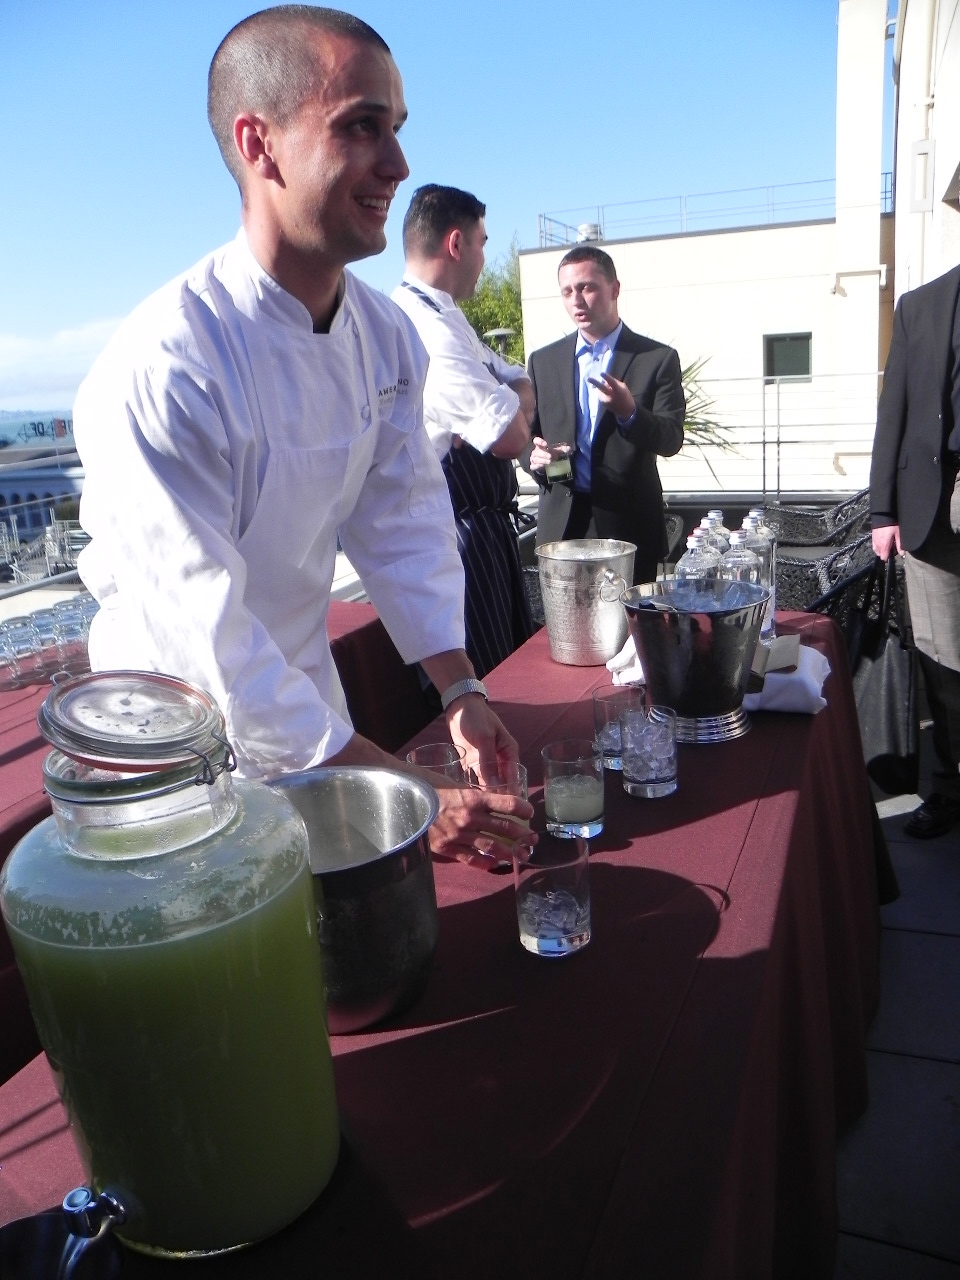 Stewart serving refreshing glasses of cucumber gin sours on a beautiful San Francisco evening.